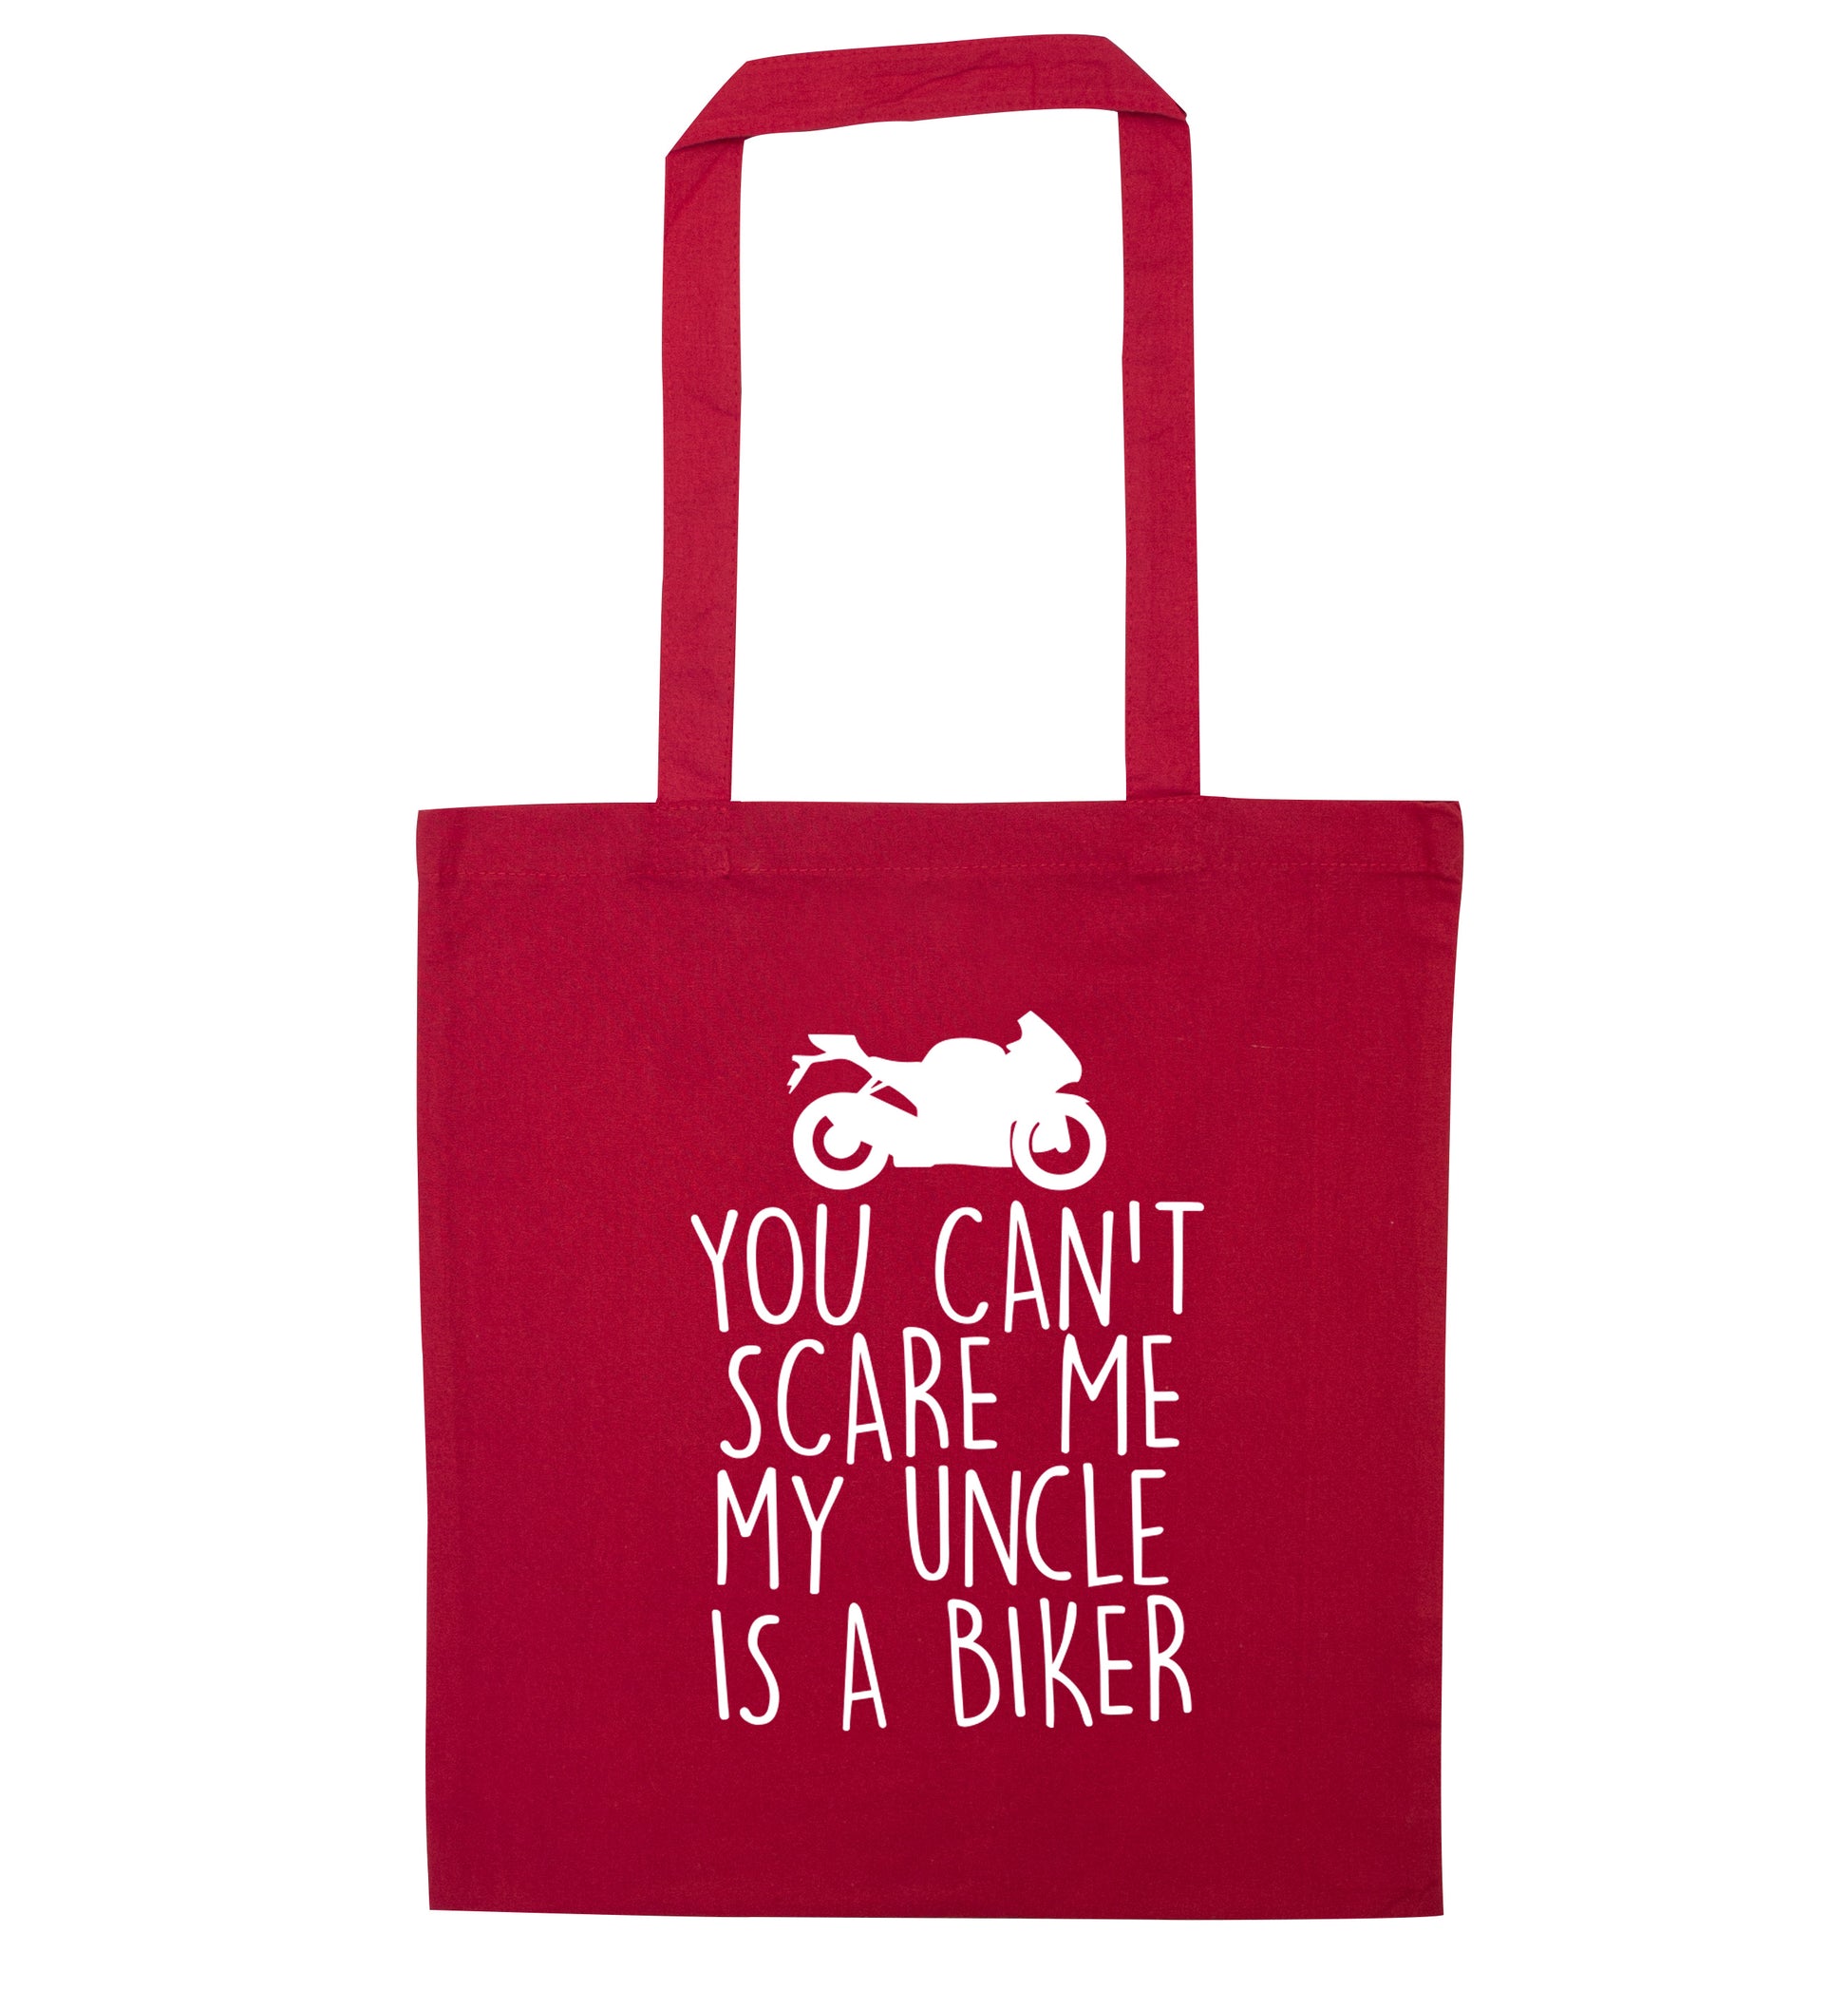 You can't scare me my uncle is a biker red tote bag